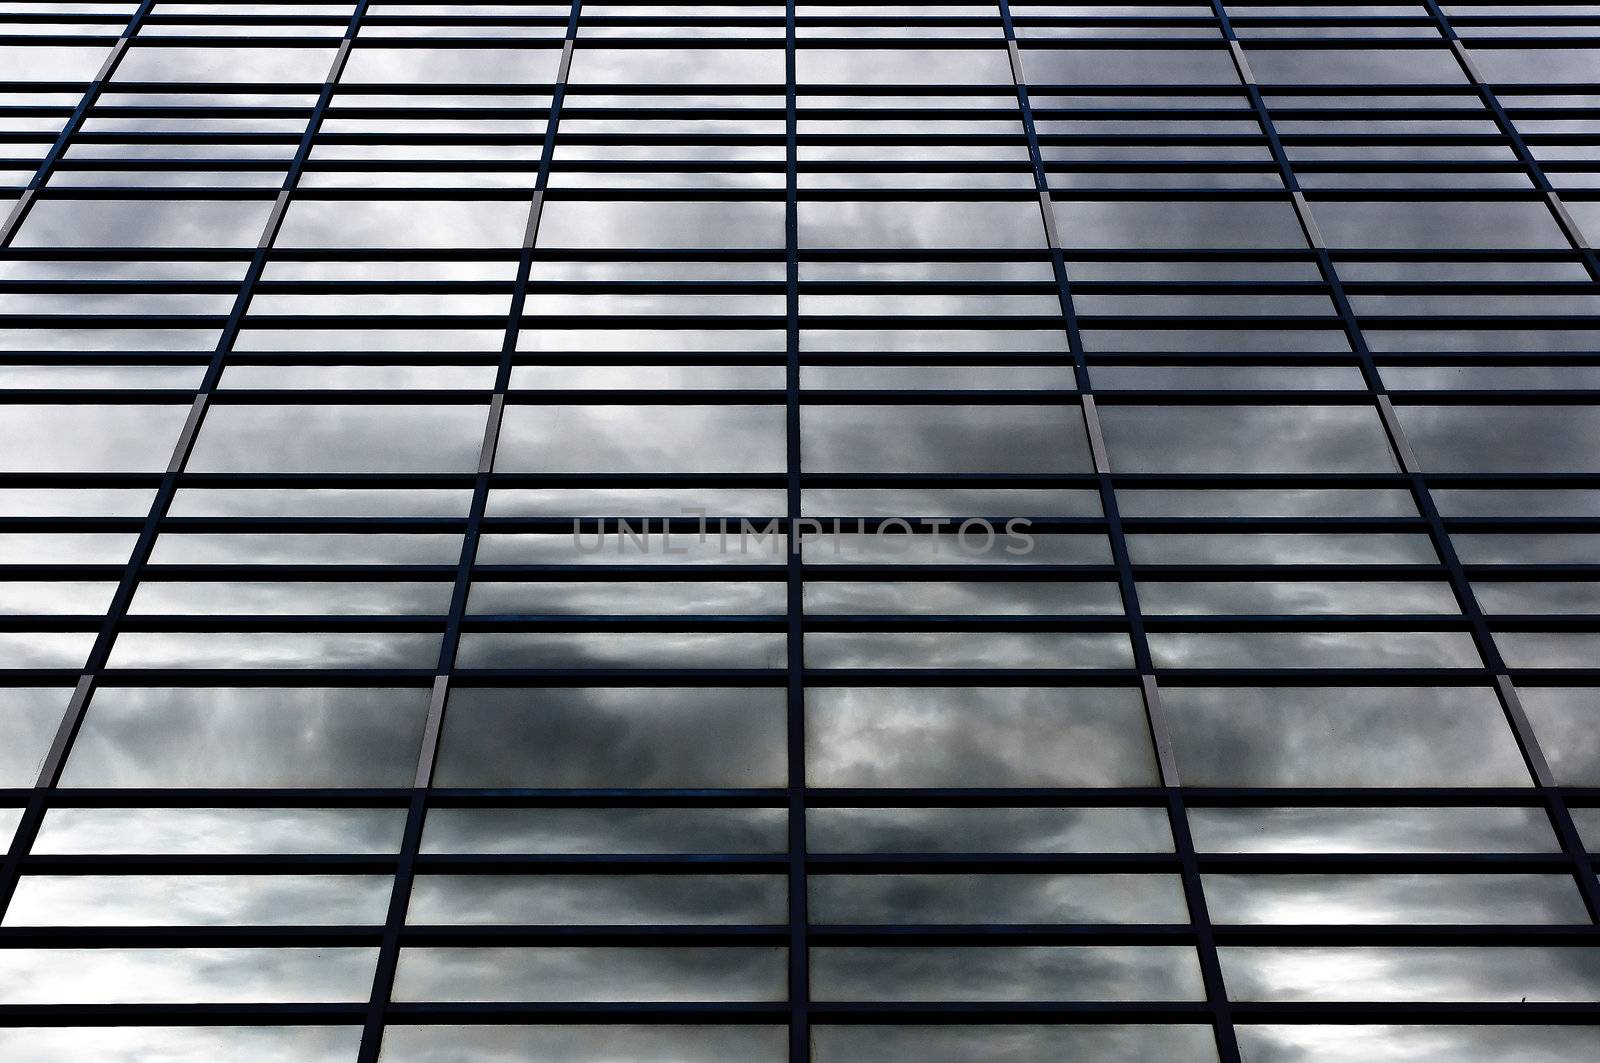 Grid of Glass on Stormy Day by watamyr